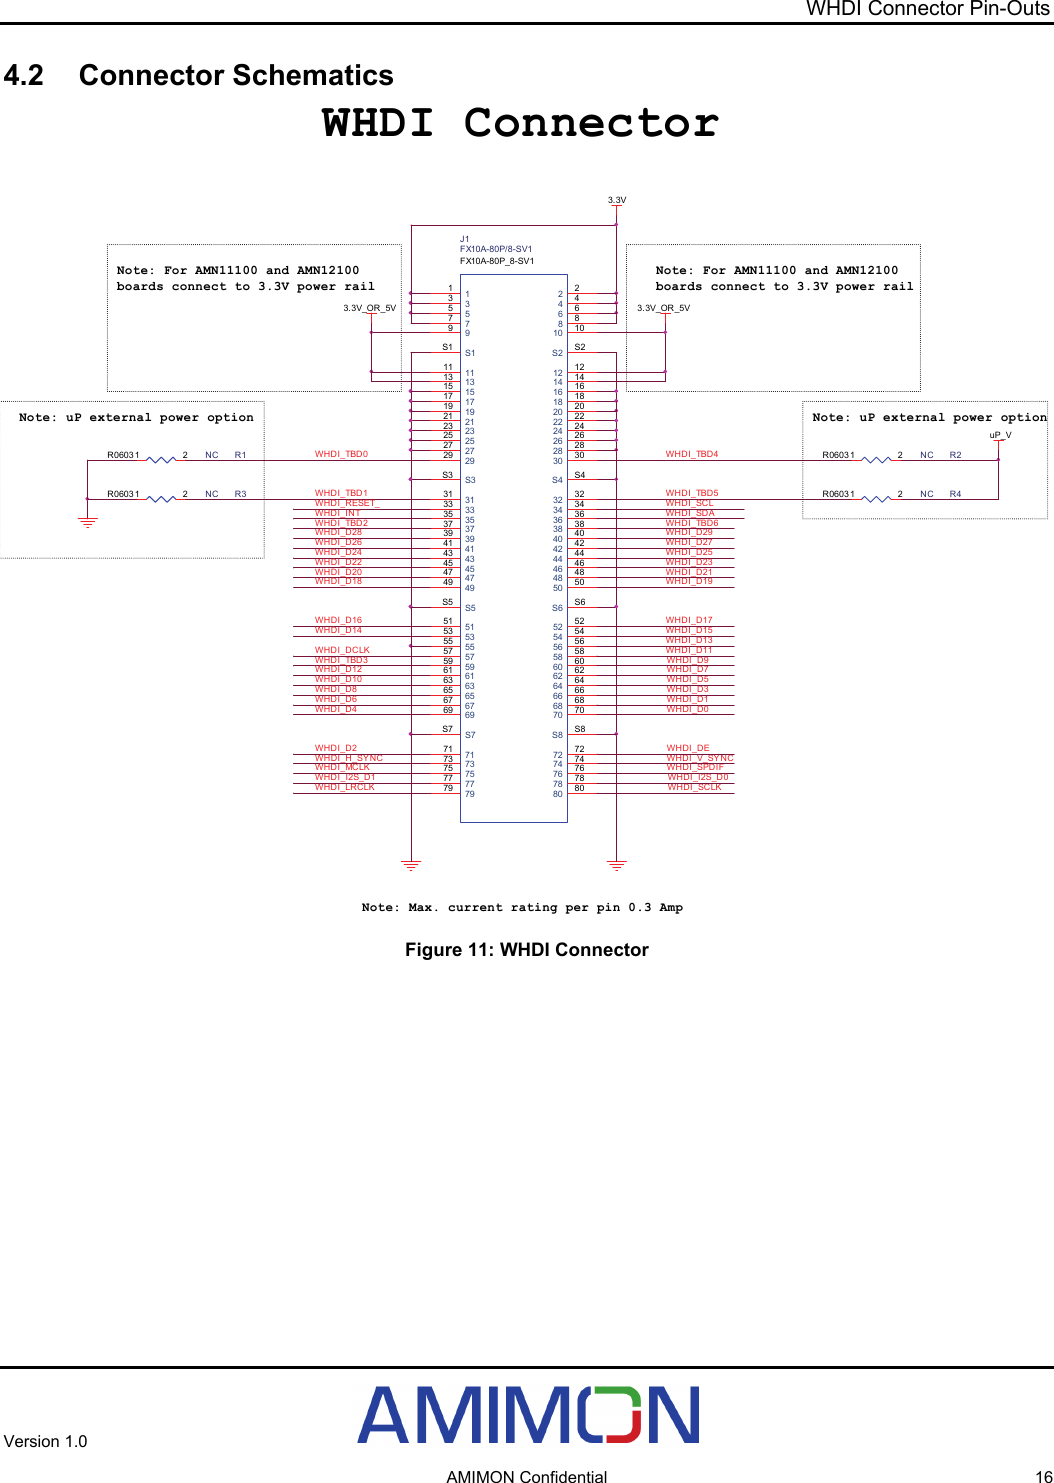 WHDI Connector Pin-Outs 4.2 Connector Schematics  AMIMON Confidential  16 WHDI_TBD3WHDI_D27WHDI_D25WHDI_D29WHDI_D19WHDI_D21WHDI_D23WHDI_SPDIFWHDI_V_SY NCWHDI_TBD4WHDI_MCLKWHDI_H_SYNCWHDI_TBD5WHDI_DER3NCR0603 1 2R1NCR0603 1 2Note: Max. current rating per pin 0.3 AmpWHDI_TBD6WHDI_D2WHDI_D12WHDI_D10WHDI_D8WHDI_D6WHDI_D4Note: For AMN11100 and AMN12100boards connect to 3.3V power railWHDI_TBD0WHDI_TBD1WHDI_D28WHDI_D24WHDI_D26WHDI_D20WHDI_D22WHDI_D18WHDI_RESET_Note: uP external power optionJ1FX10A-80P/8-SV1FX10A-80P_8-SV11133557799111113131515171719192121232325252727292931313333353537373939414143434545474749495151535355555757595961616363656567676969717173737575777779792244668810 1012 1214 1416 1618 1820 2022 2224 2426 2628 2830 3032 3234 3436 3638 3840 4042 4244 4446 4648 4850 5052 5254 5456 5658 5860 6062 6264 6466 6668 6870 7072 7274 7476 7678 7880 80S1S1 S2 S2S3S3 S4 S4S5S5 S6 S6S7S7 S8 S83.3V_OR_5VWHDI_D16WHDI_D14WHDI_INT3.3VWHDI_DCLK3.3V_OR_5VWHDI_SDAWHDI_D3WHDI_D13WHDI_D15WHDI_D5WHDI_D1WHDI_D7WHDI_D9WHDI_D11WHDI_D0WHDI_I2S_D1WHDI_LRCLKR4NCR0603 1 2uP_VR2NCR0603 1 2WHDI_D17WHDI_SCLKWHDI_I2S_D0WHDI_SCLWHDI_TBD2WHDI ConnectorNote: uP external power optionNote: For AMN11100 and AMN12100boards connect to 3.3V power rail Figure 11: WHDI Connector Version 1.0    